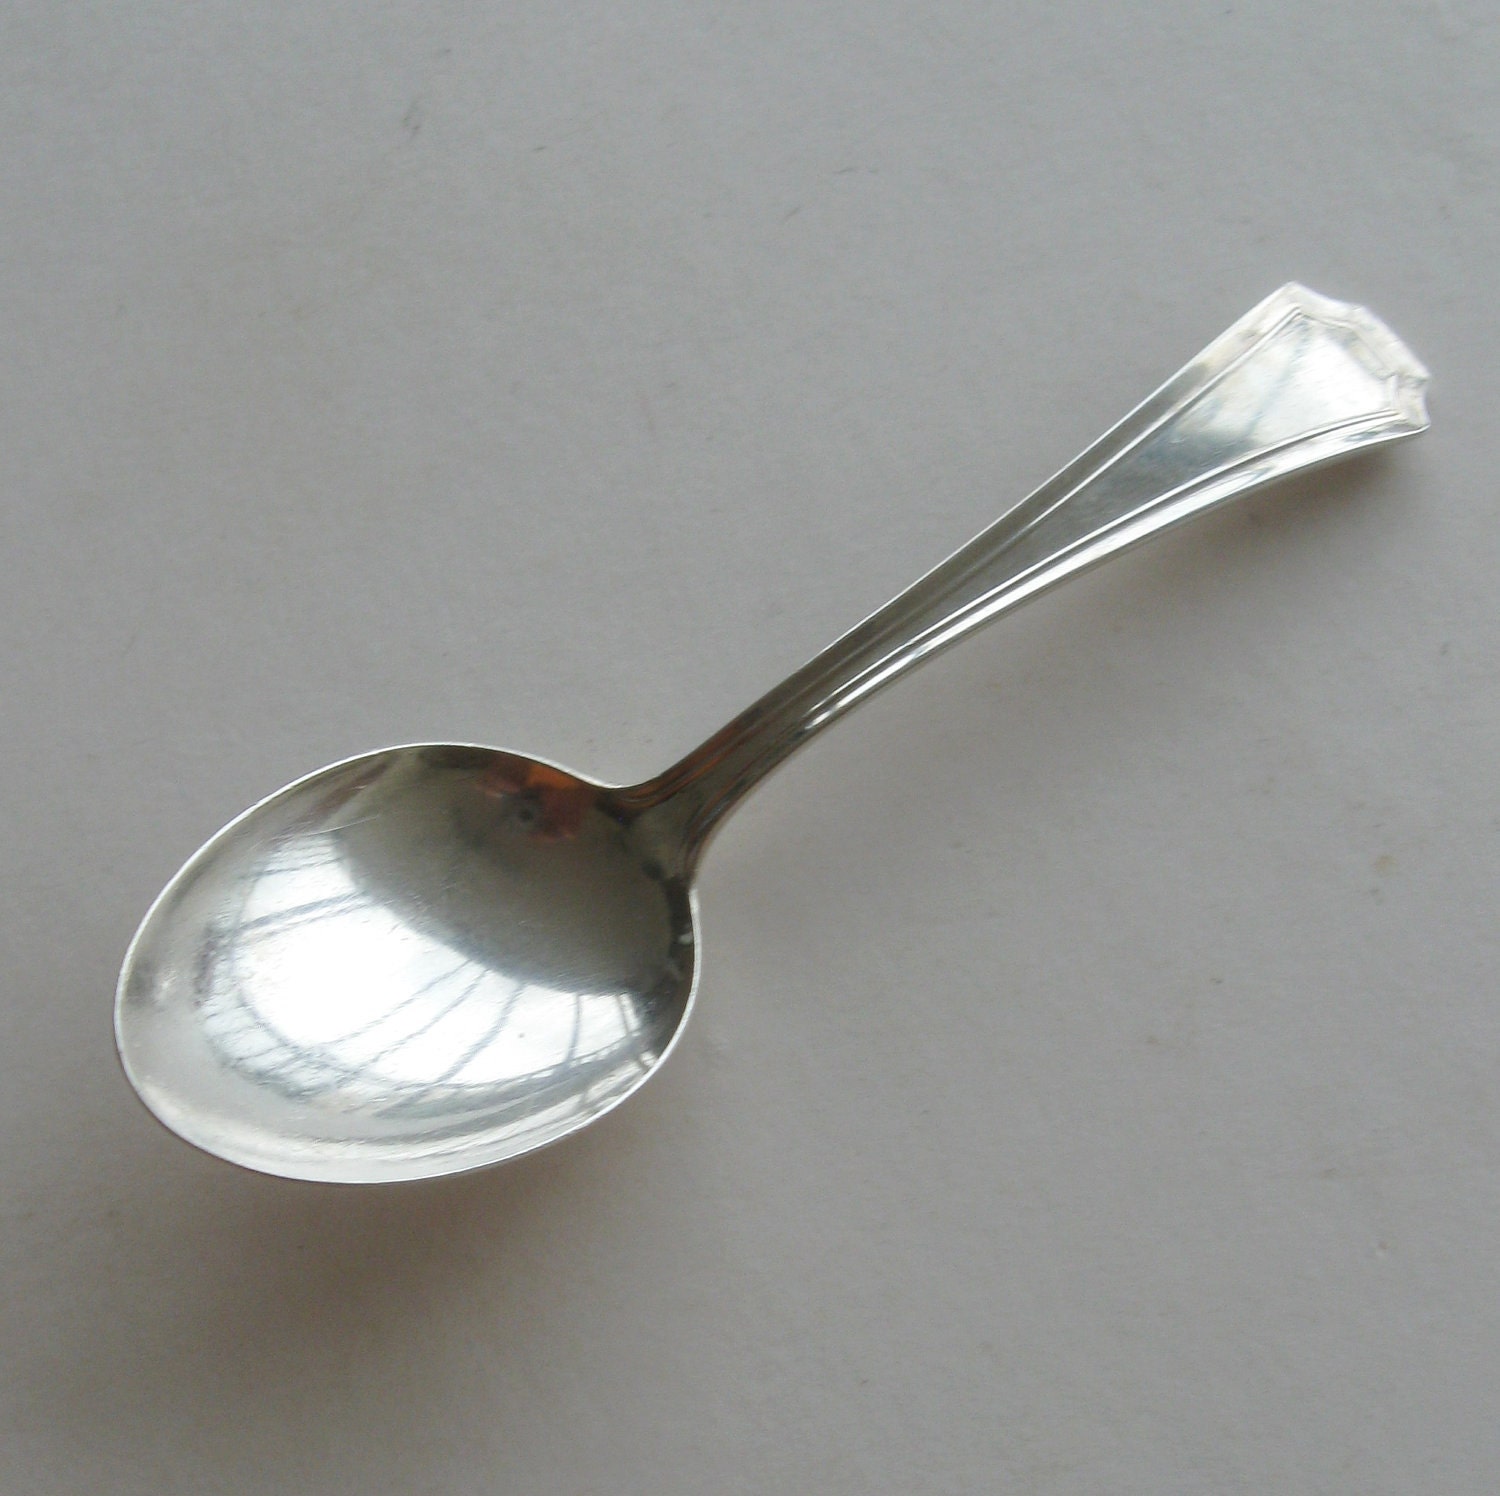 Vintage Baby Spoon Infant Spoon Sterling Silver by